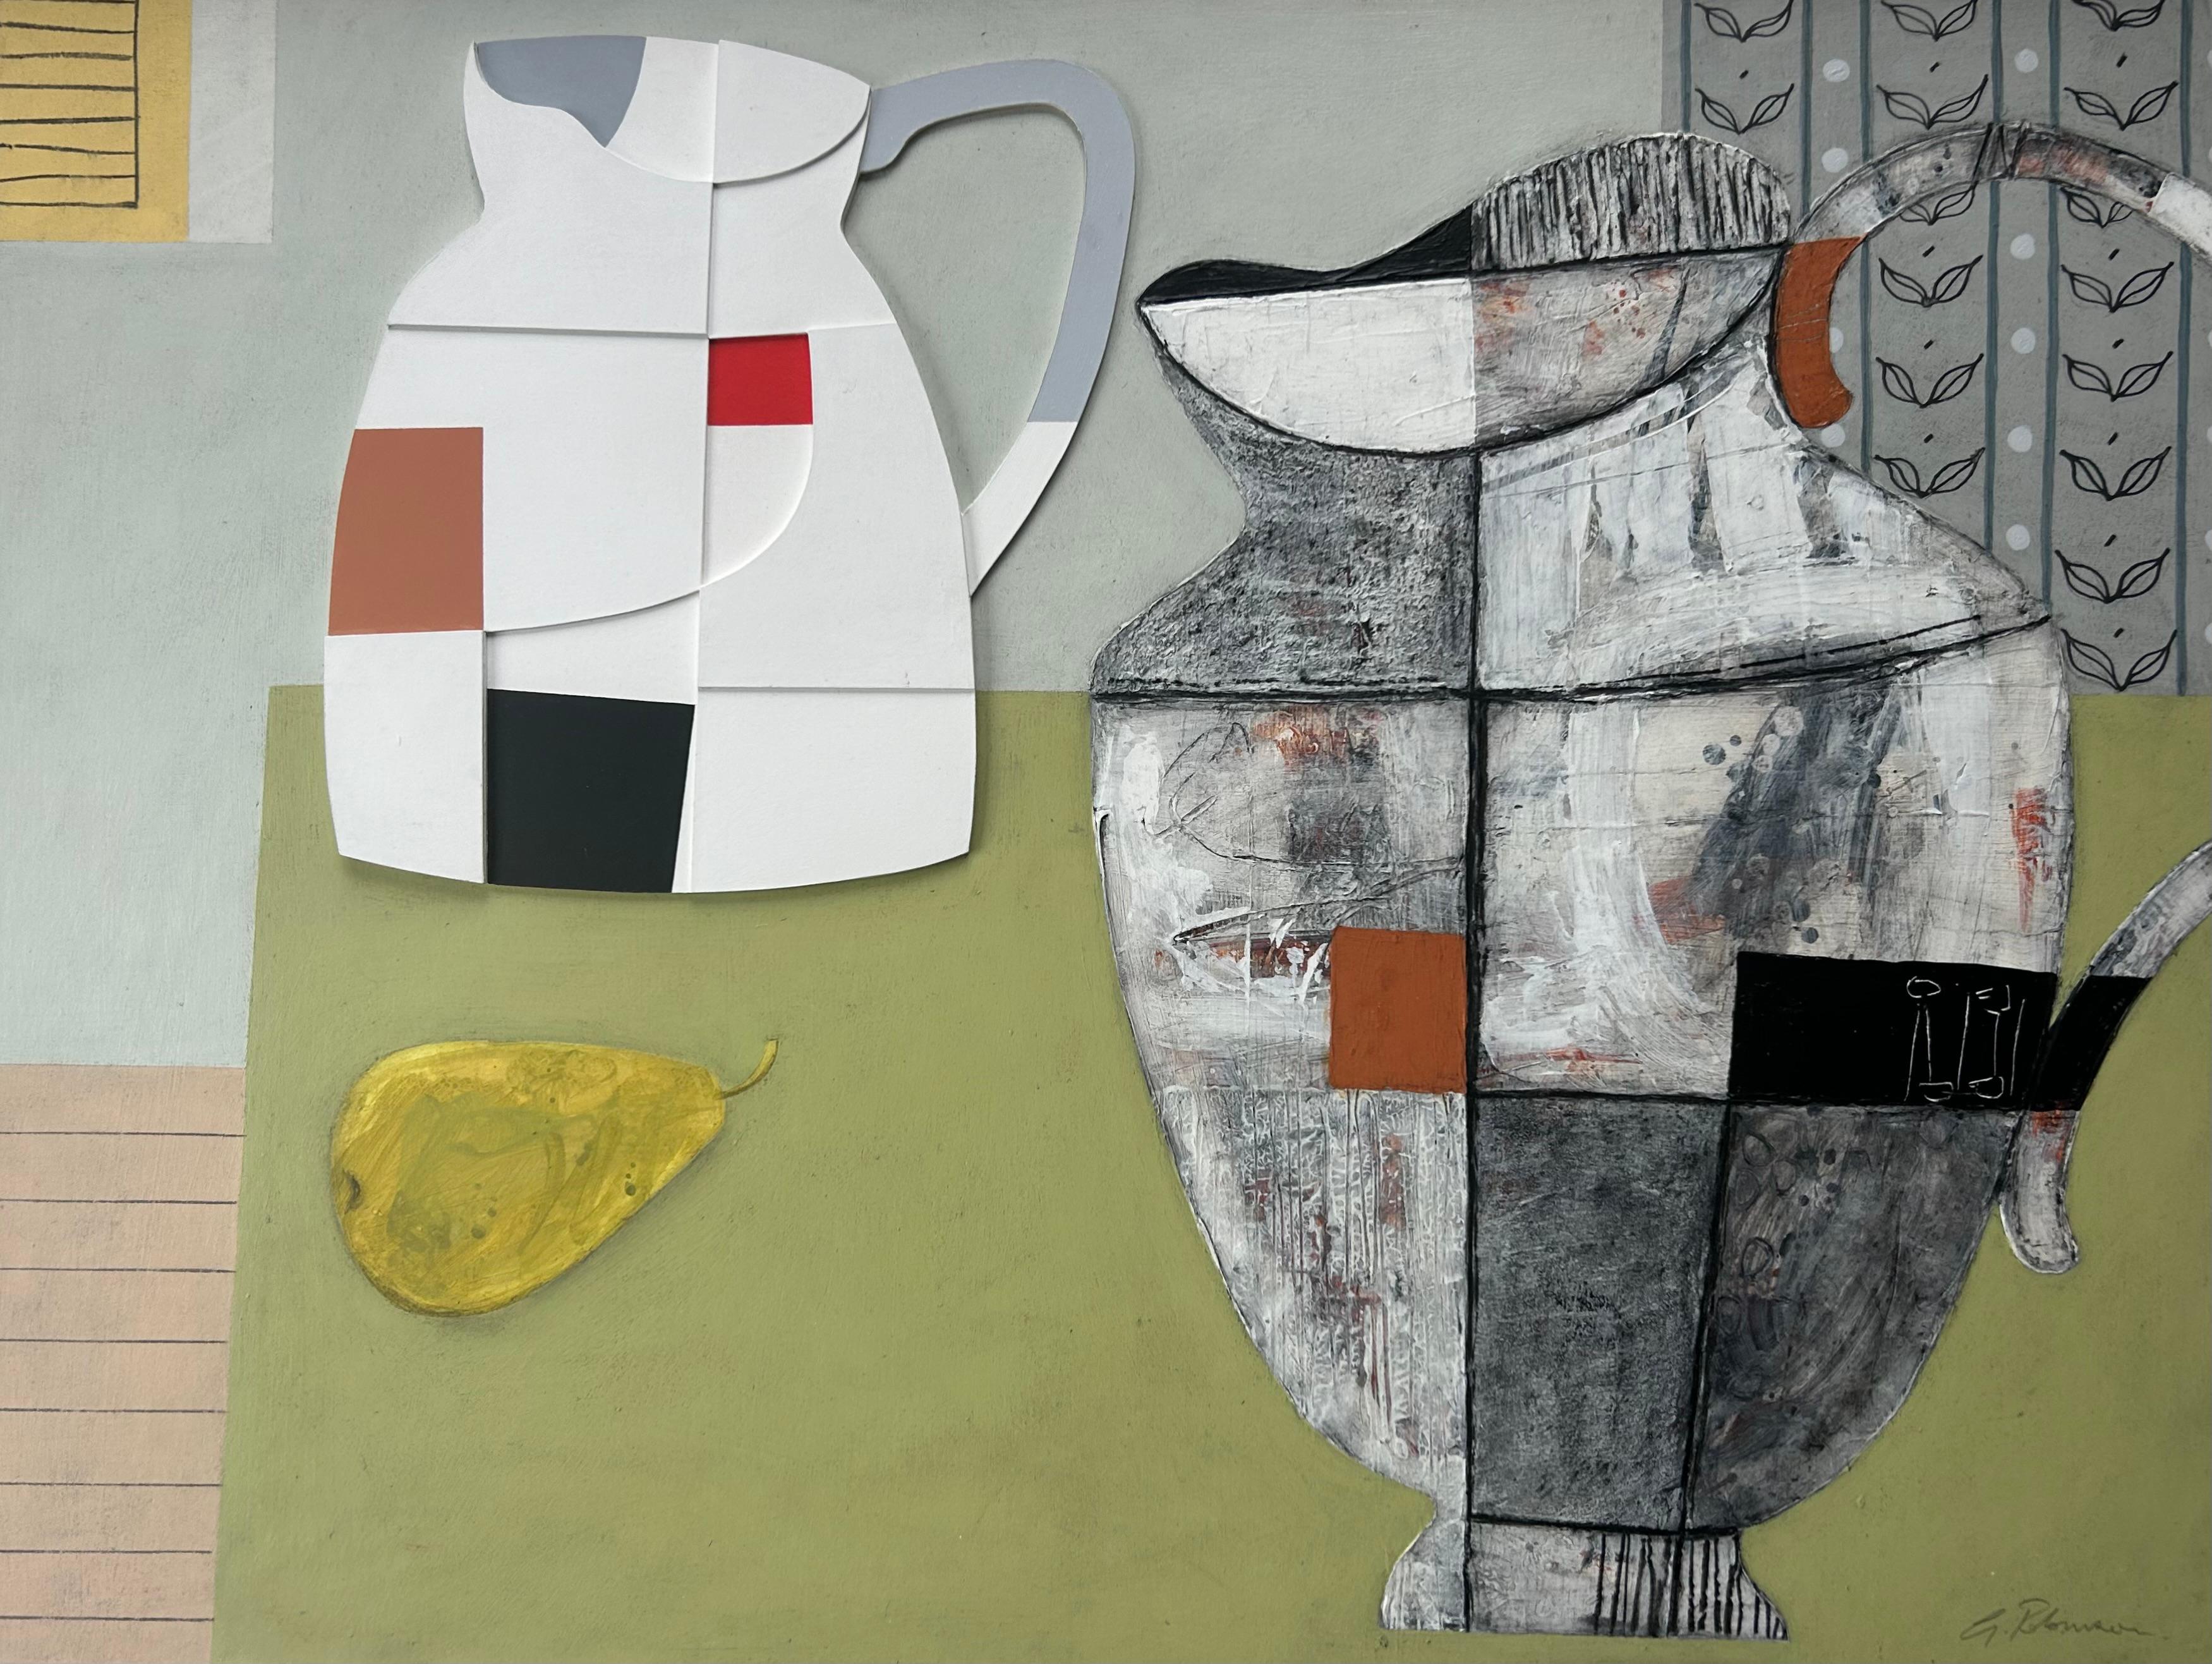 ROBINSON, Geoffrey (b.1945)
Green Table
2000
50.7 x 67.3 cm
Collage on board, Unframed 

Geoffrey Robinson trained at Bournemouth College of Art in the 1960’s, before a career in advertising and music. Since the 1990’s he began a full time painting